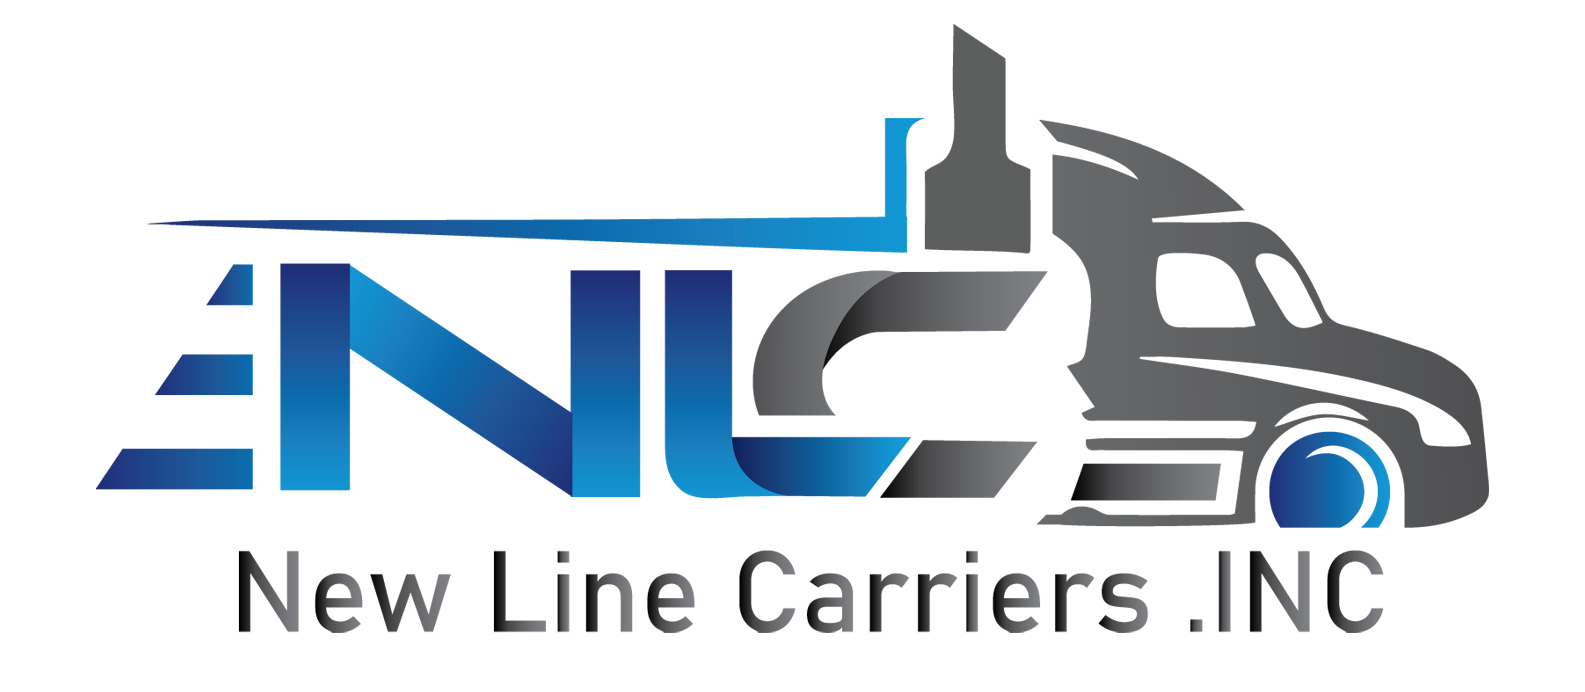 New Line Carriers